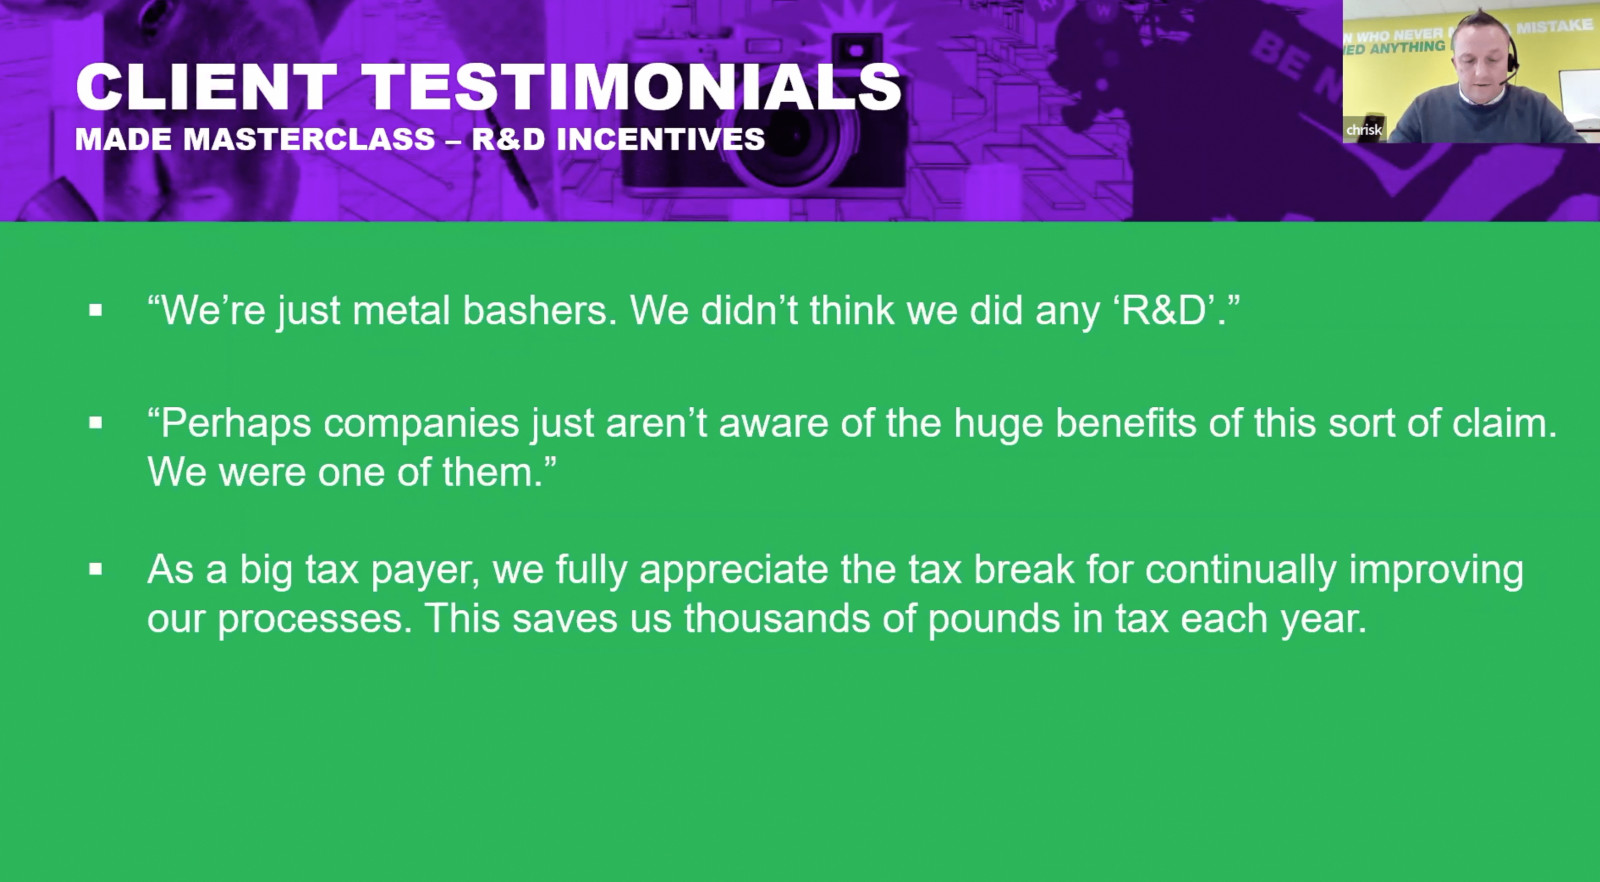 The R&D Client Testimonials That You Need to Hear